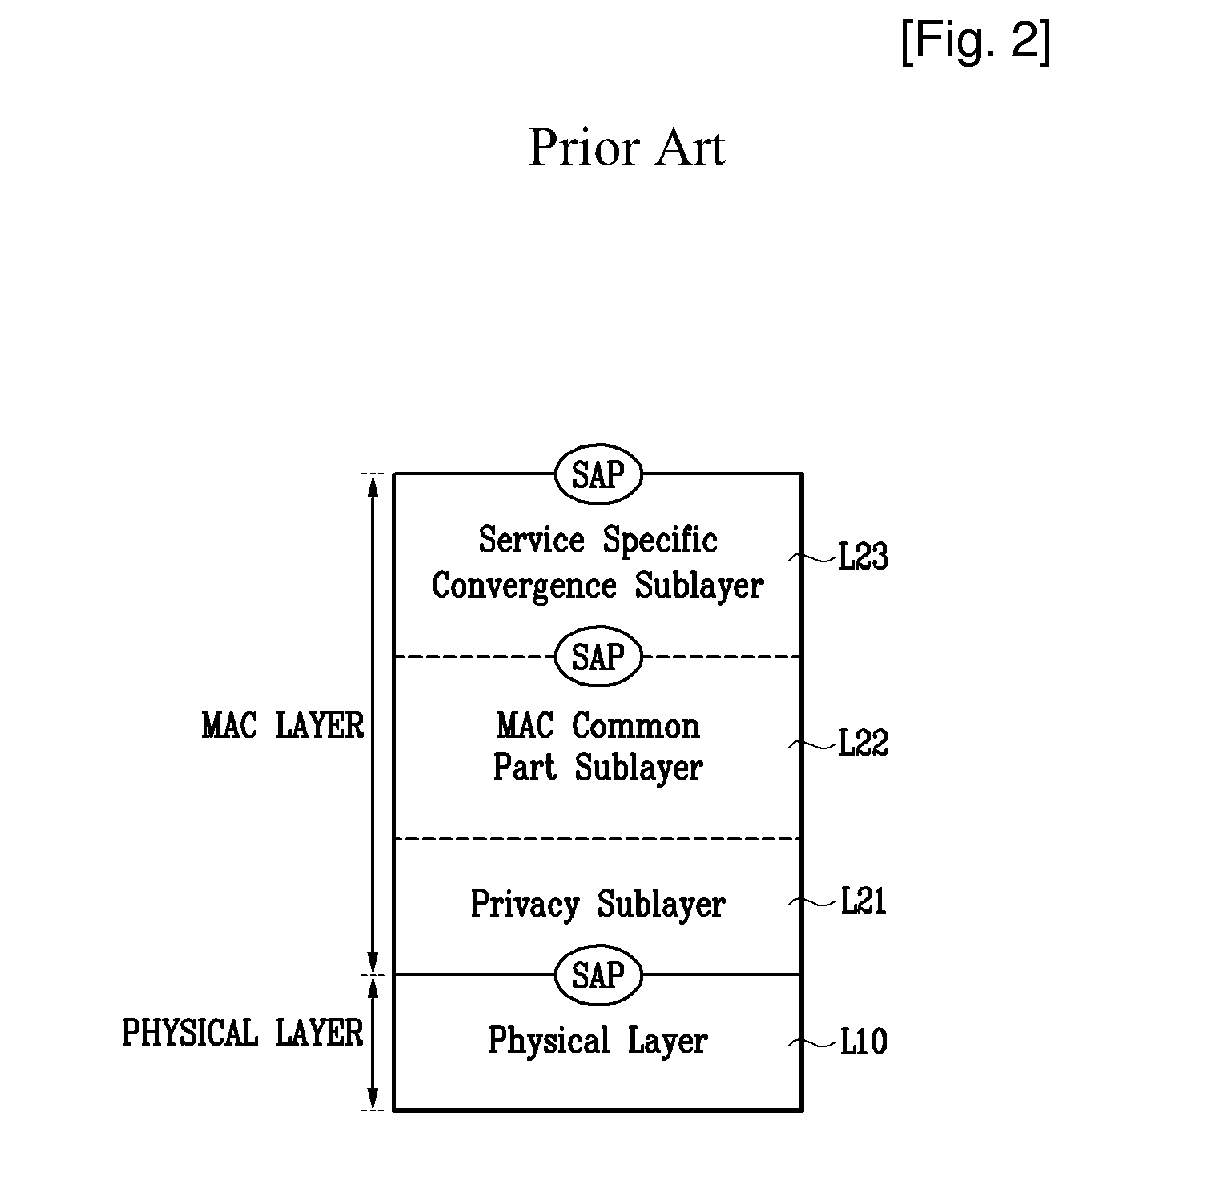 Method for Dynamic Address Allocation Using Mobile Ip in Wireless Portable Internet System